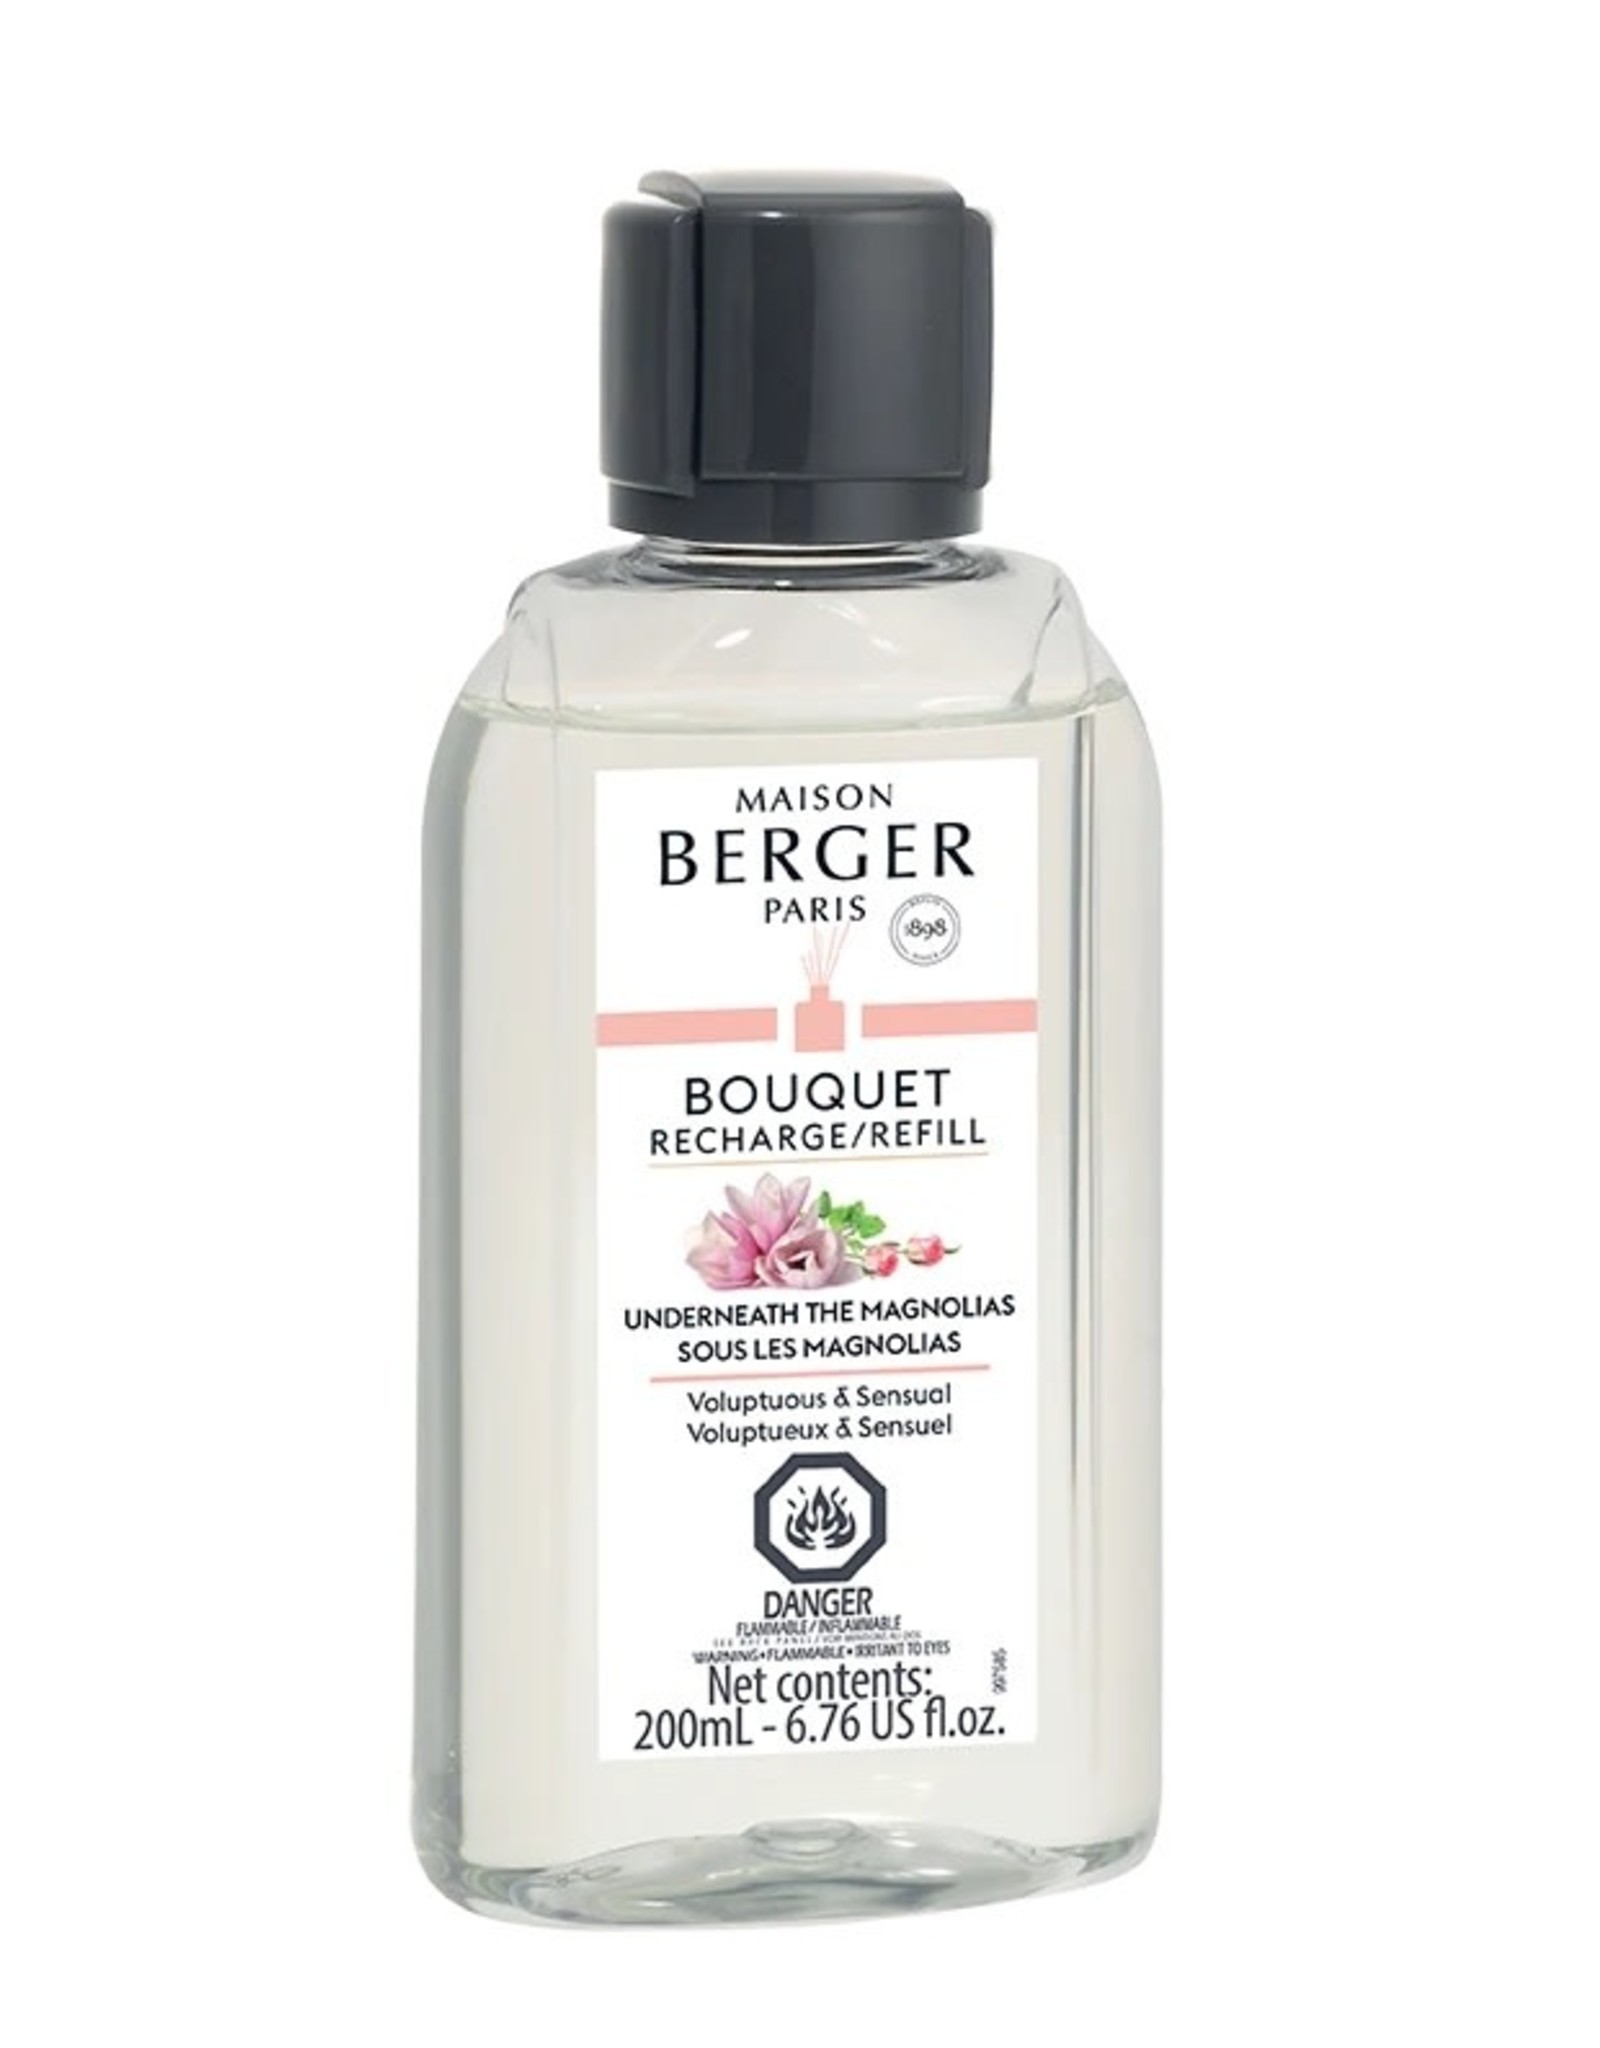 Maison Berger Underneath the Magnolias Reed Diffuser Refill – 200 ml